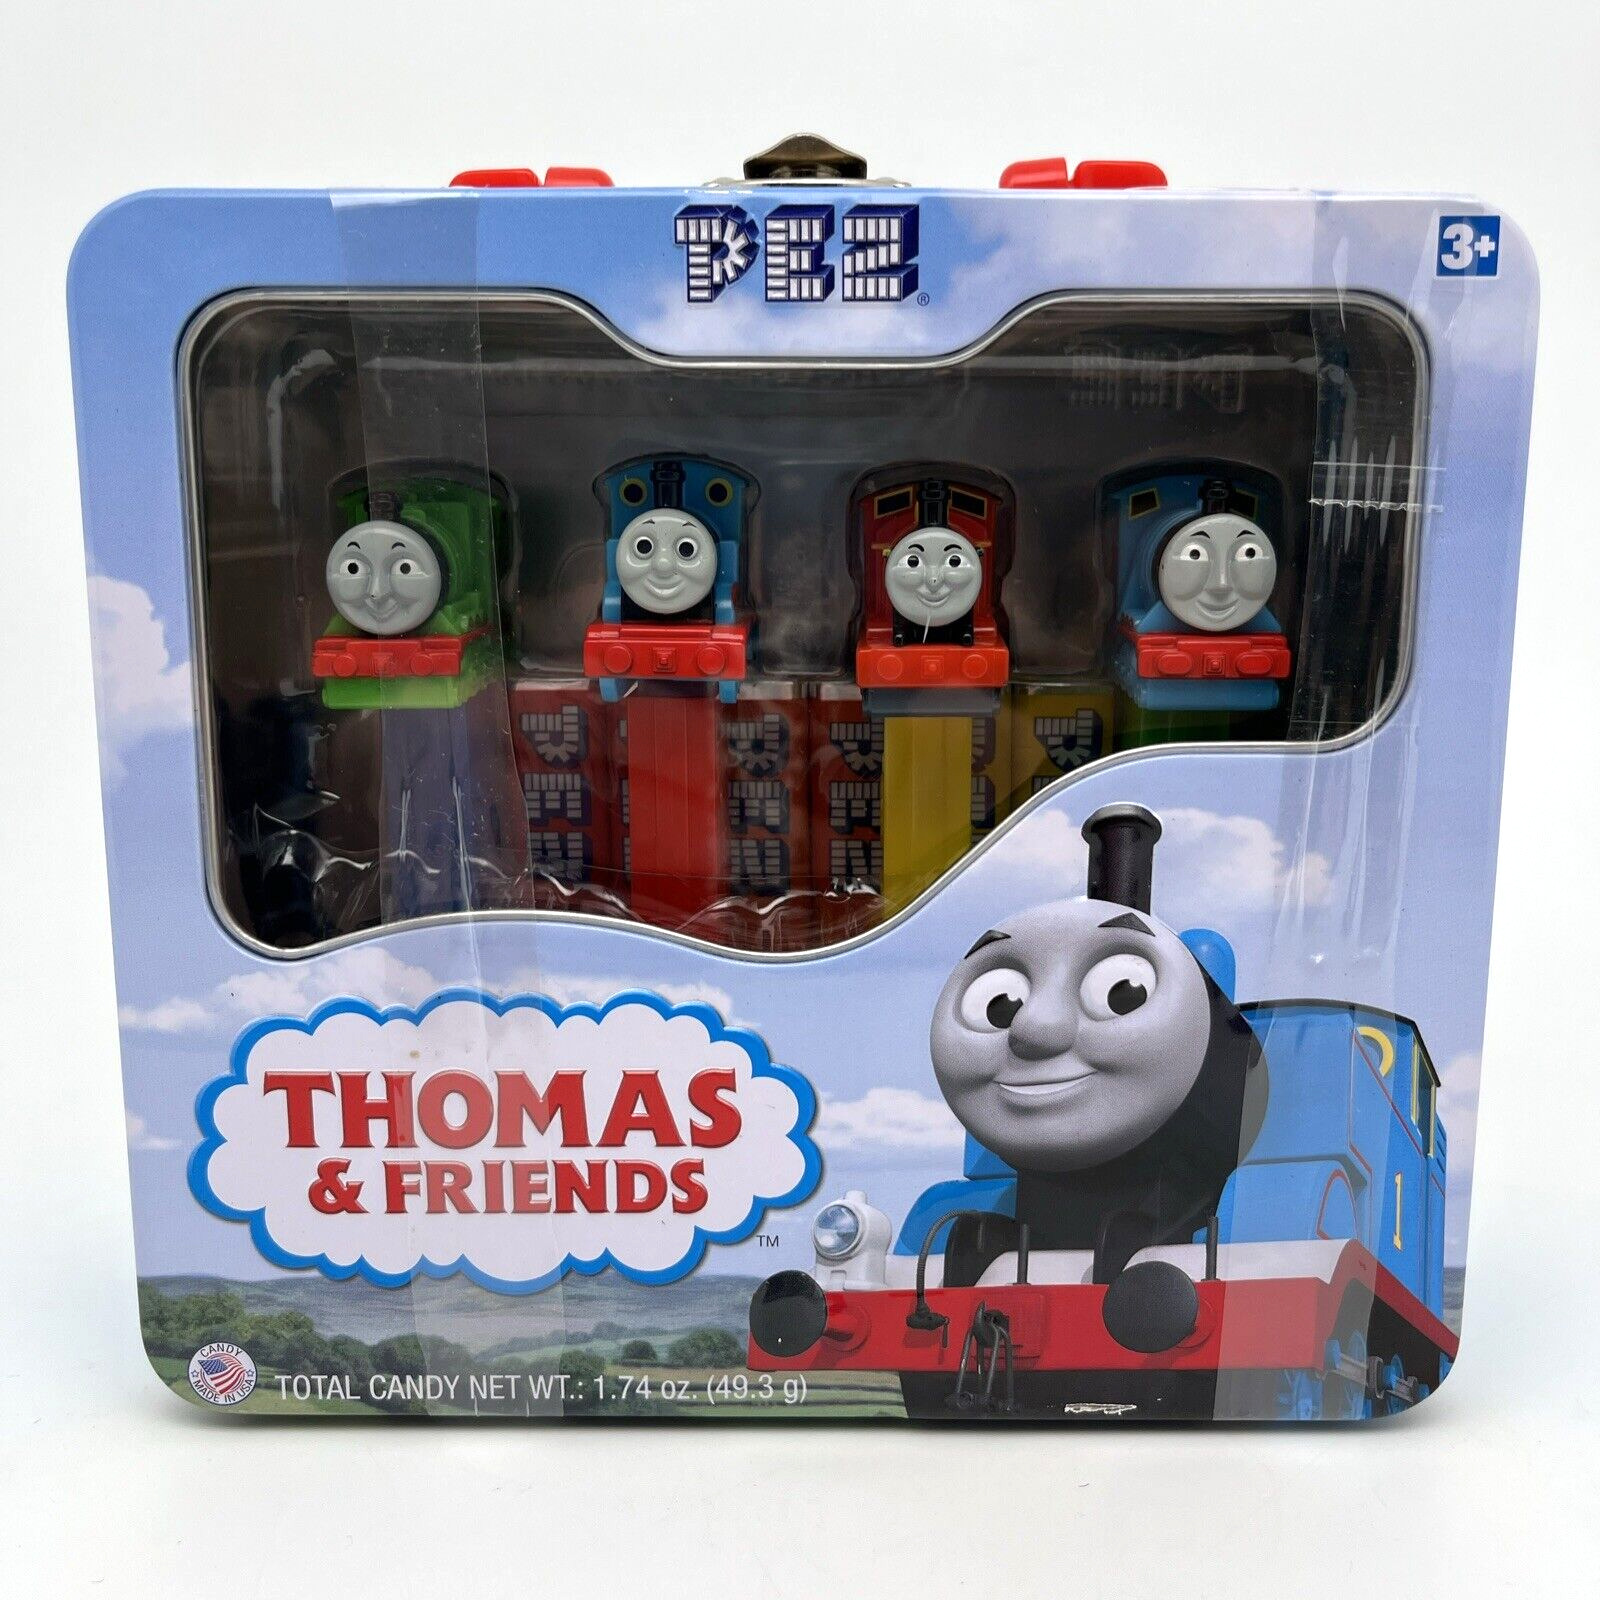 PEZ 2010 THOMAS & FRIENDS 4 DISPENSERS IN TIN LUNCHBOX GIFT SET NEW RARE